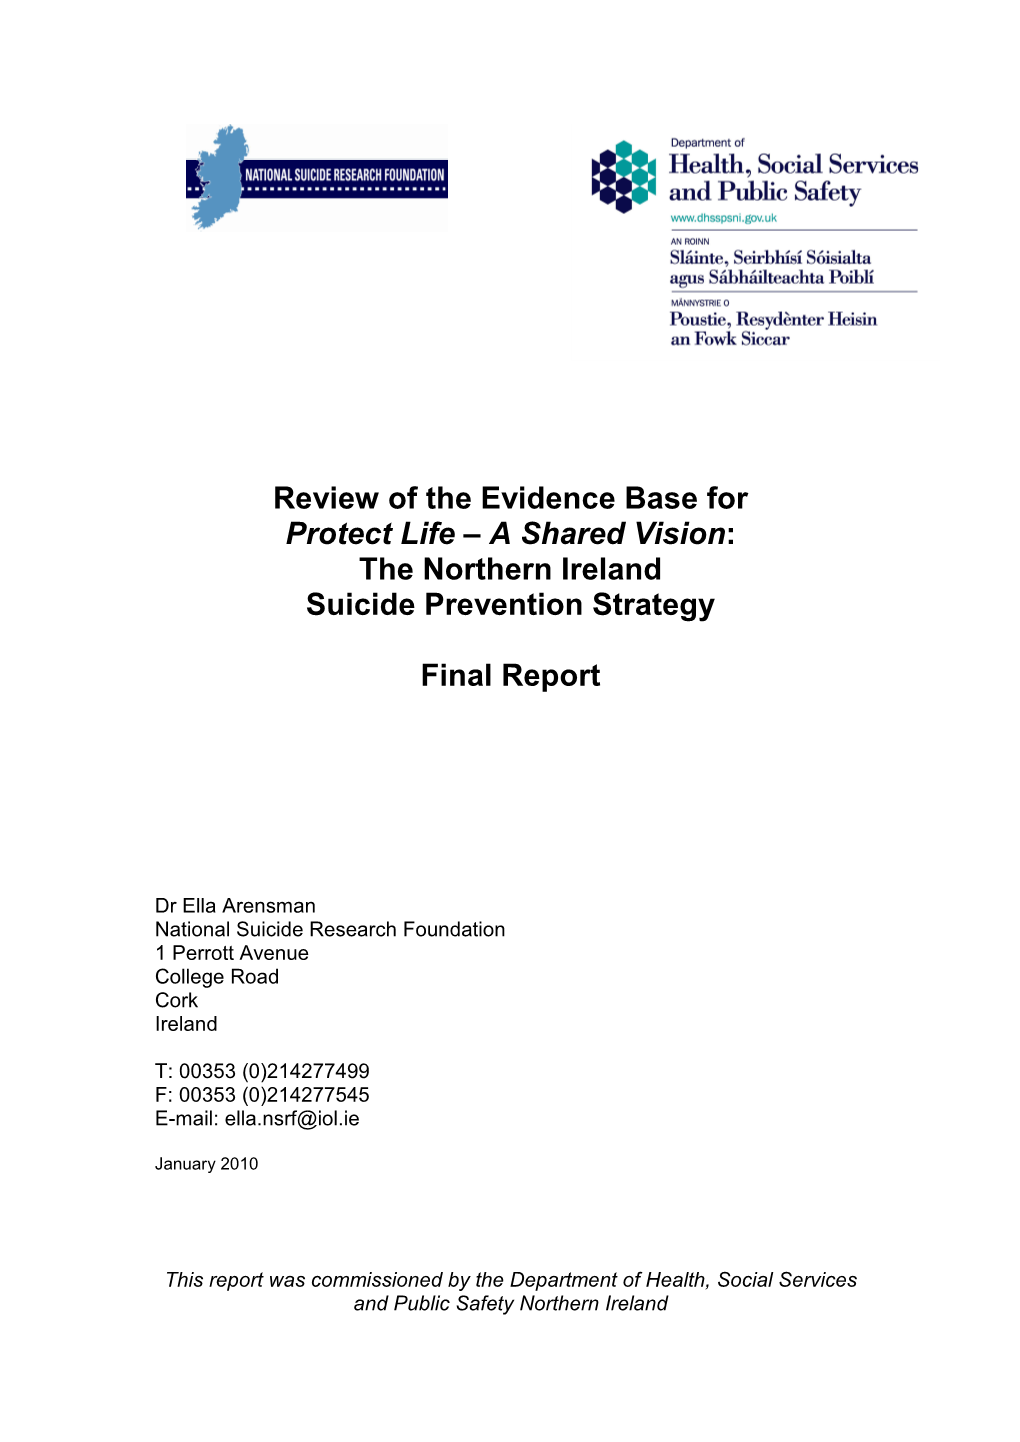 Review of the Evidence Base for Protect Life – a Shared Vision: The